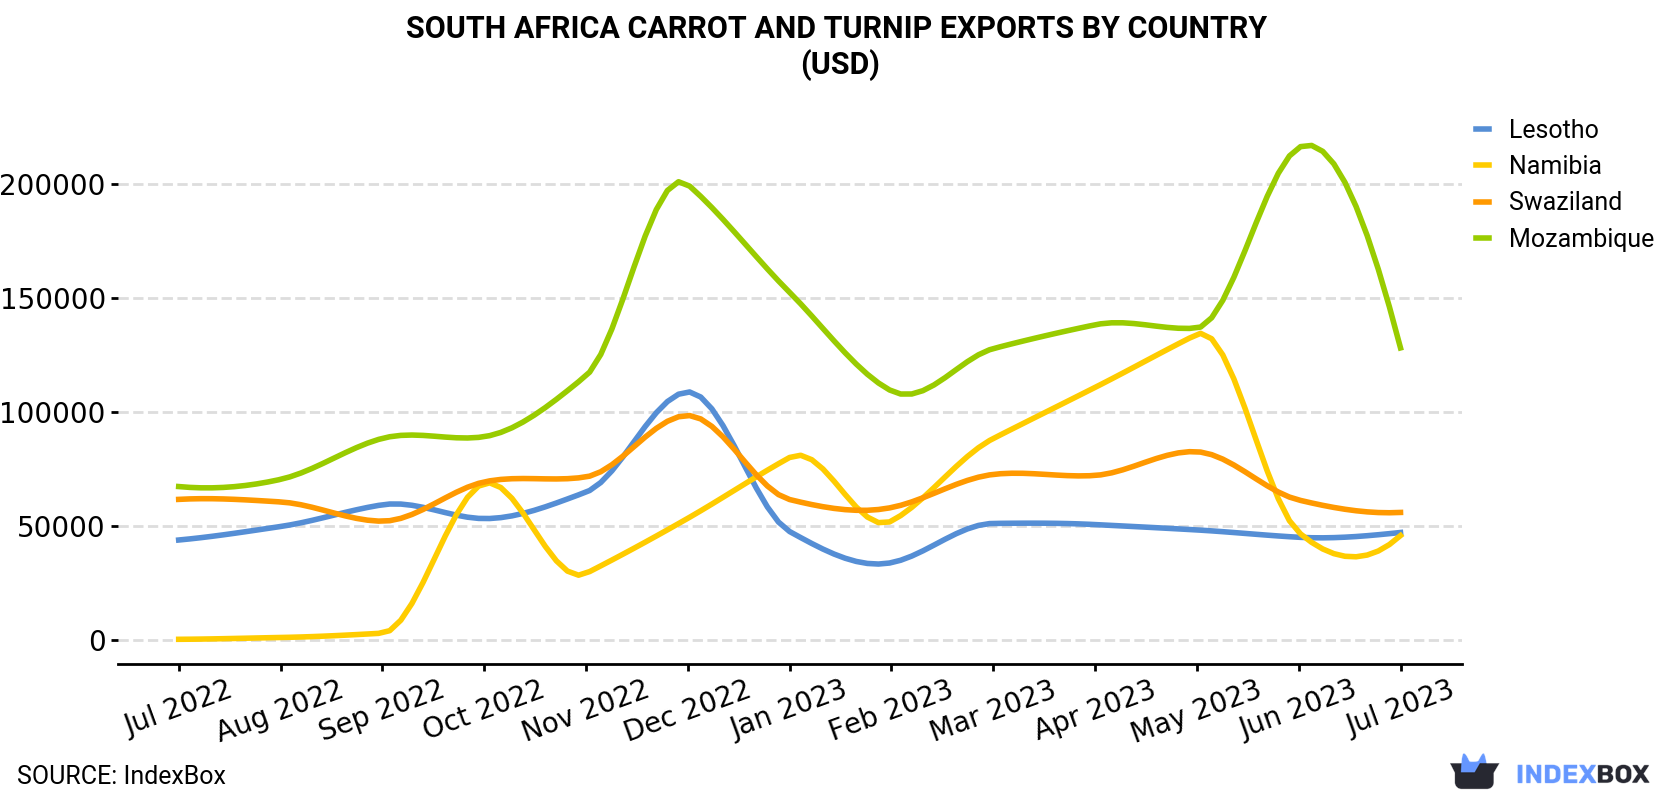 South Africa Carrot And Turnip Exports By Country (USD)